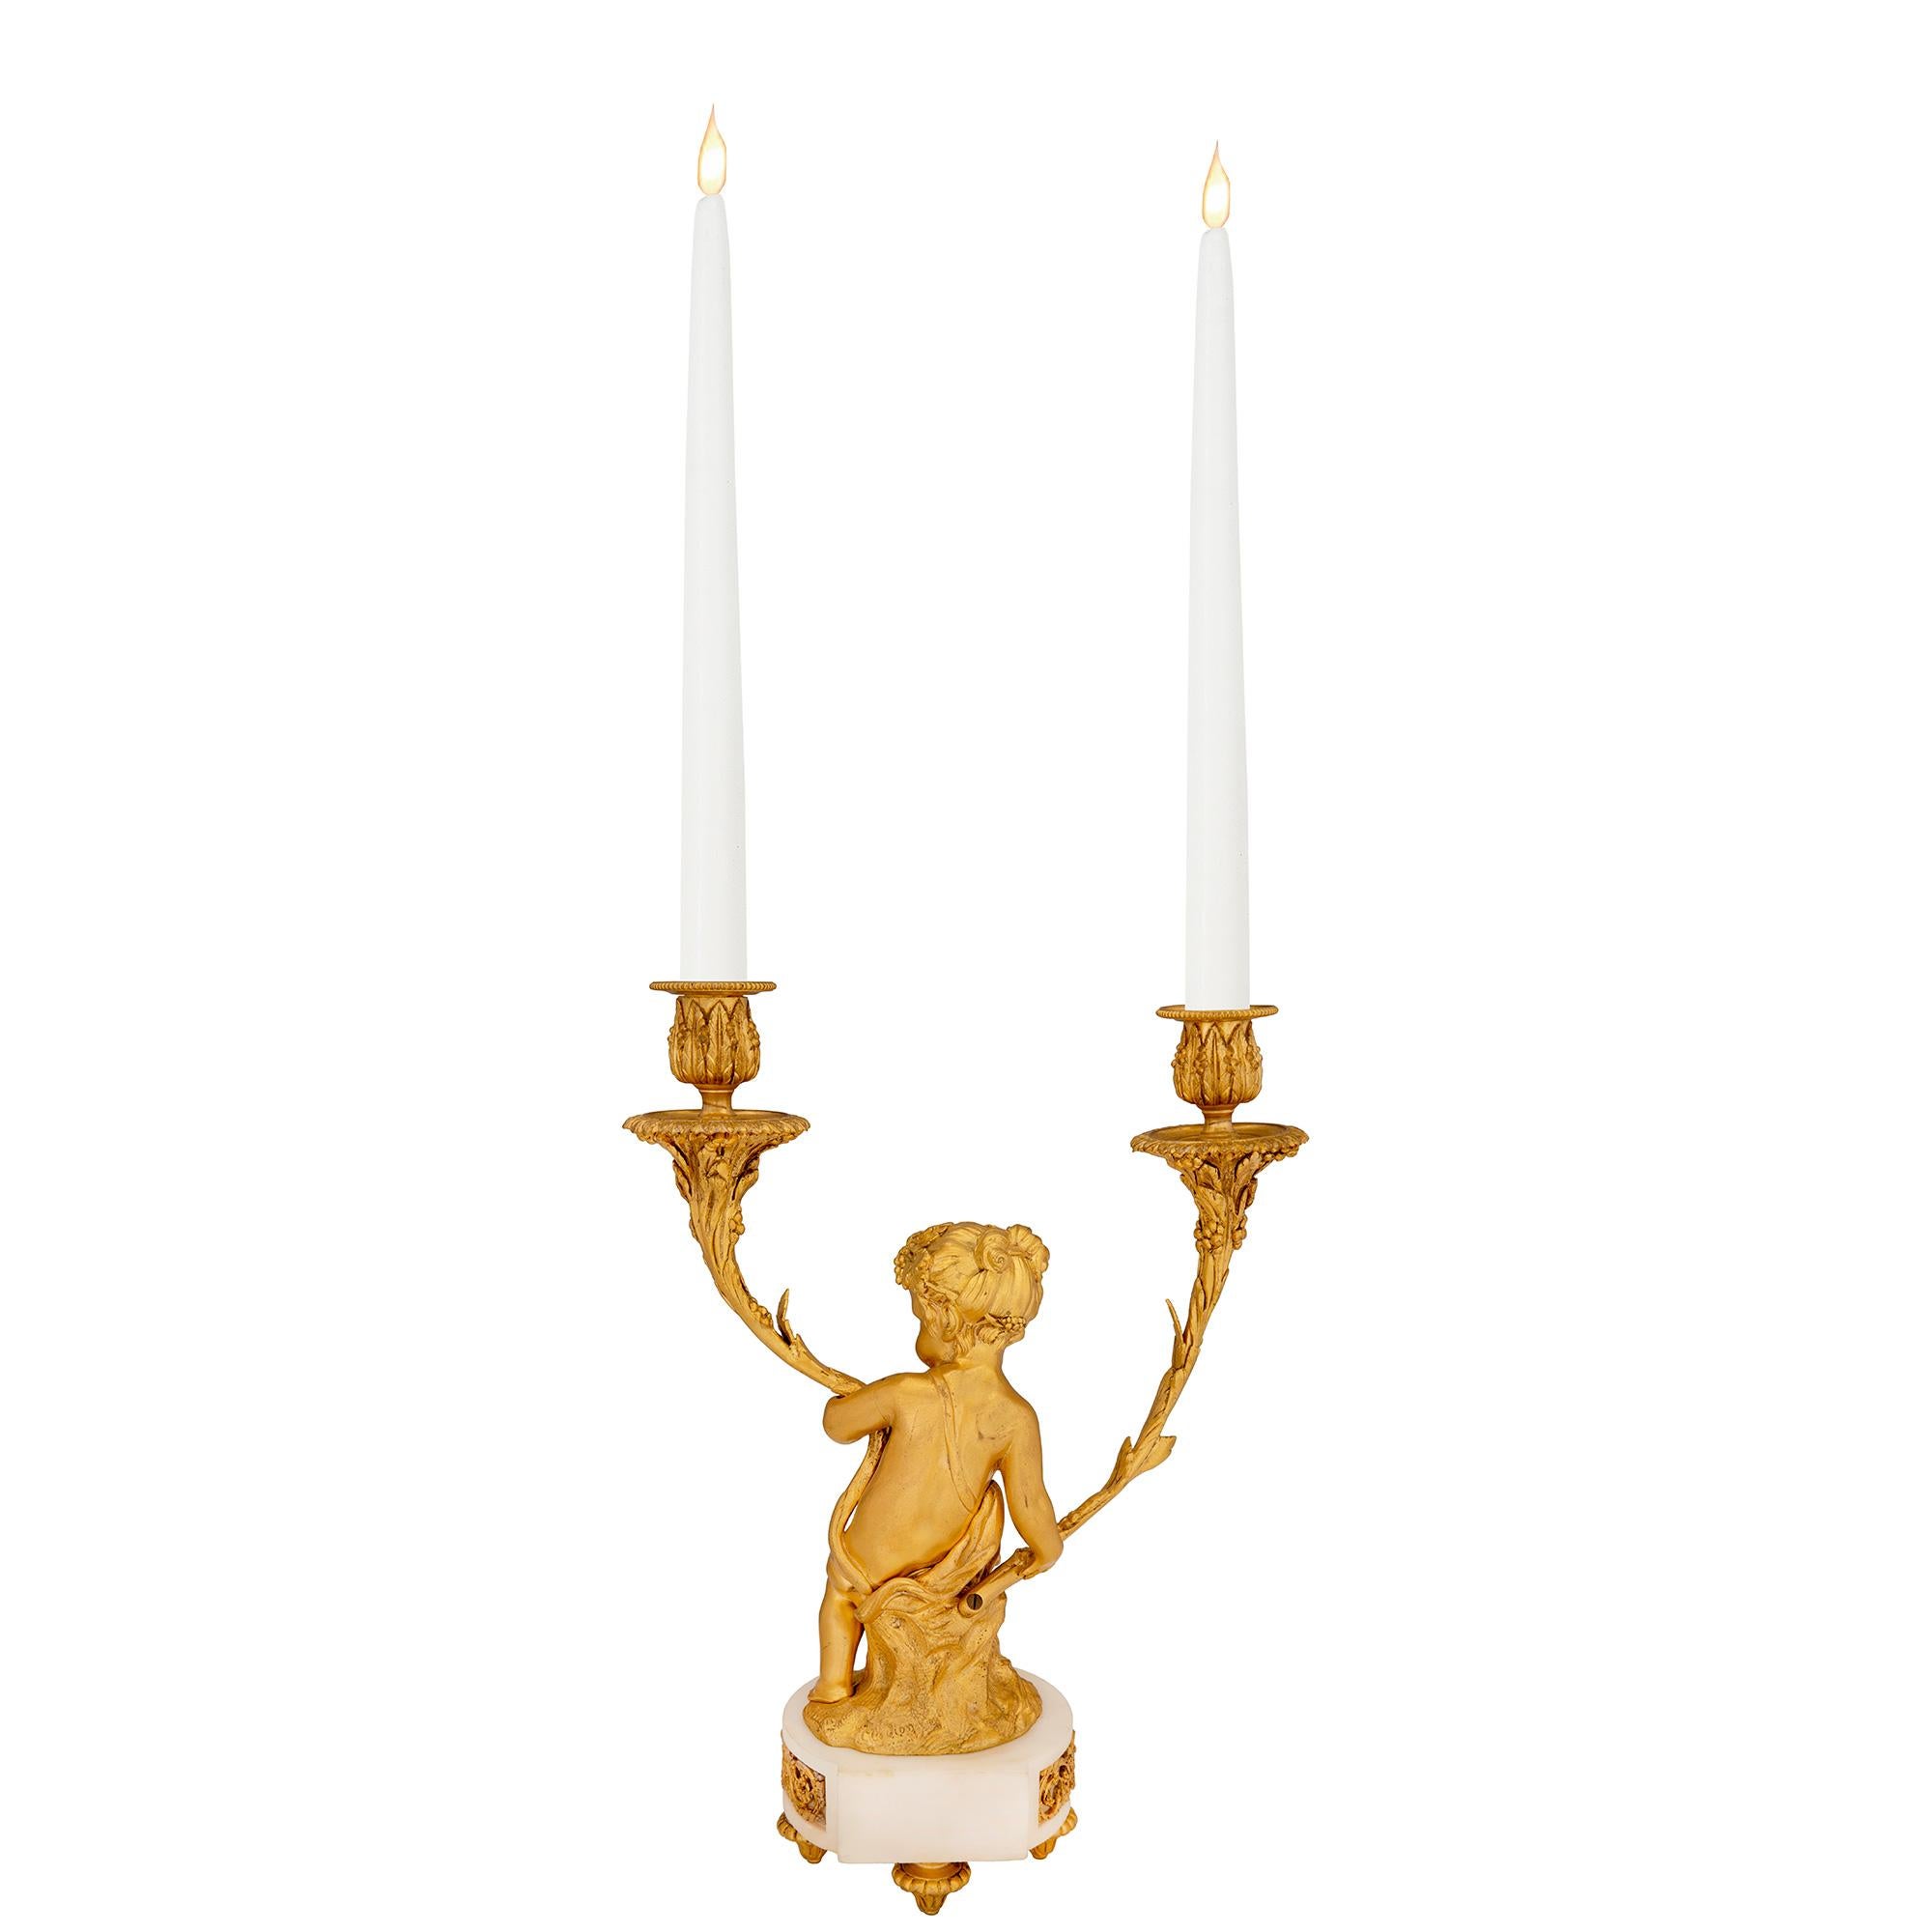 An exquisite French 19th century Louis XVI st. ormolu and white Carrara marble candelabra, modeled after Clodion. The two arm candelabra is raised by fine topie shaped feet below the white Carrara marble base with a most elegant pierced fitted